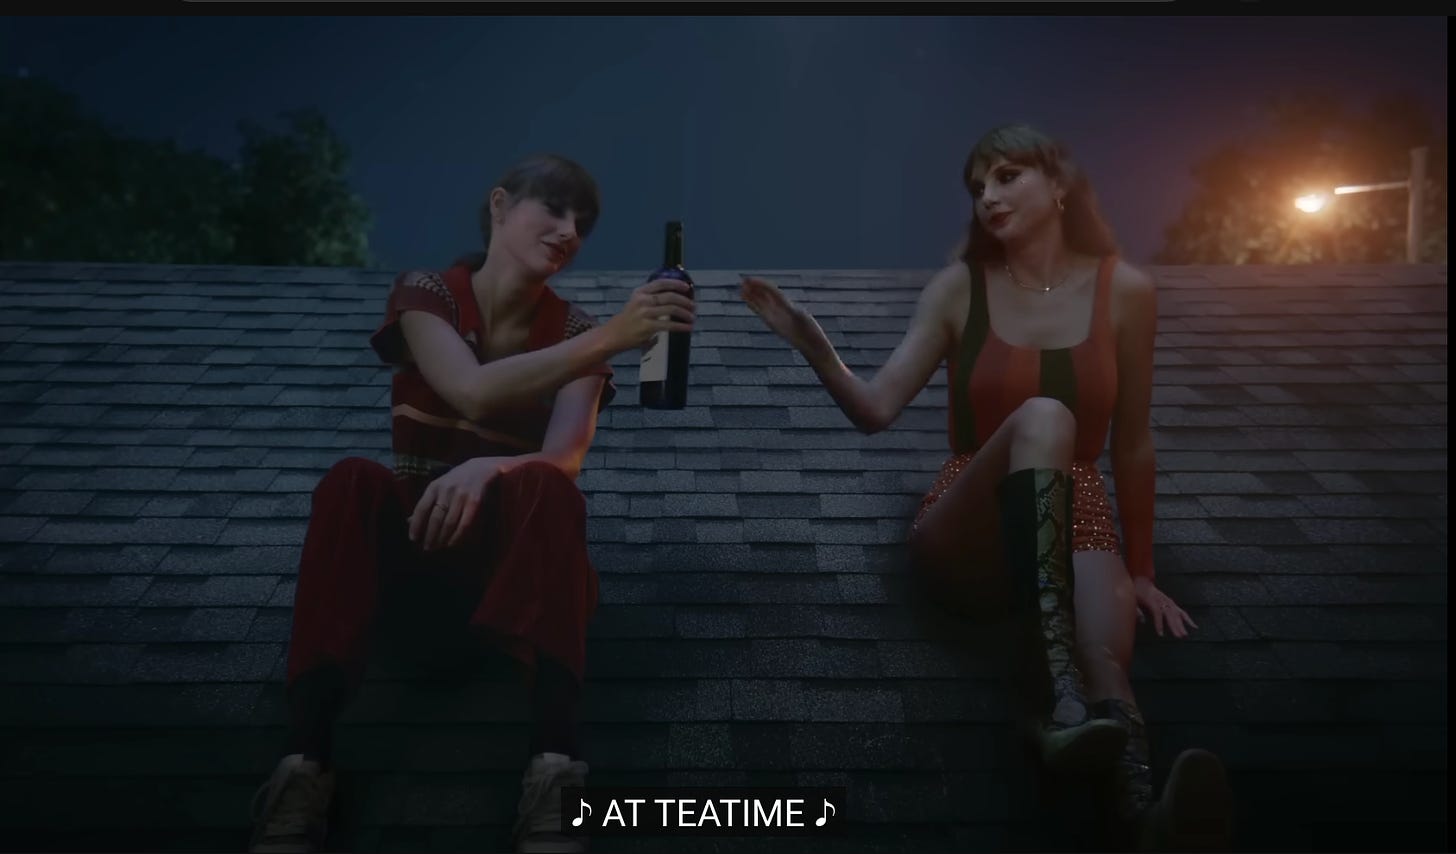 Screenshot from Taylor Swift's Anti-Hero music video with lyric "At teatime"